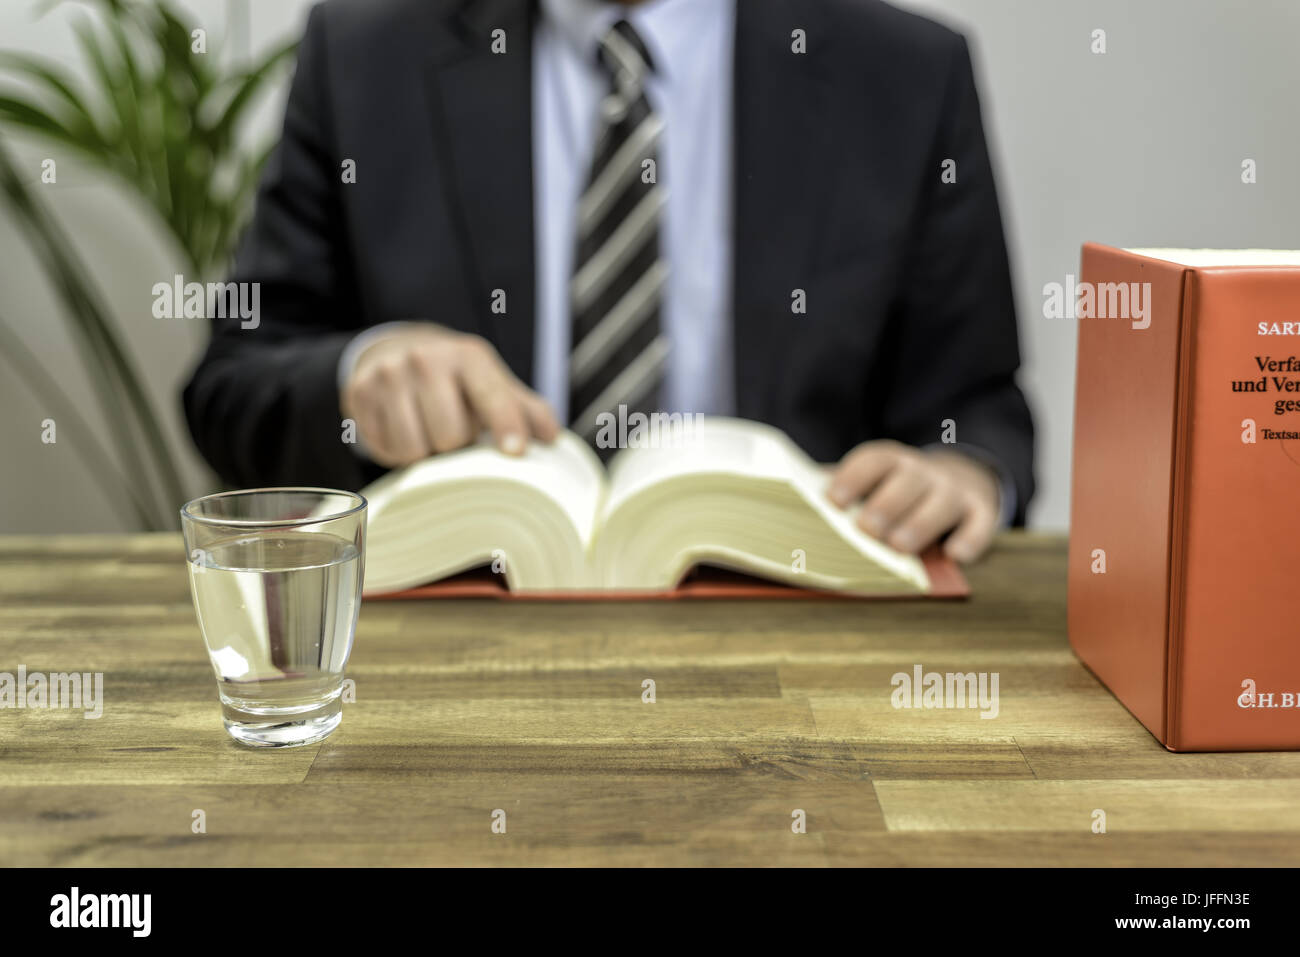 Lawyers Office Desk Stock Photos & Lawyers Office Desk Stock Images - Alamy